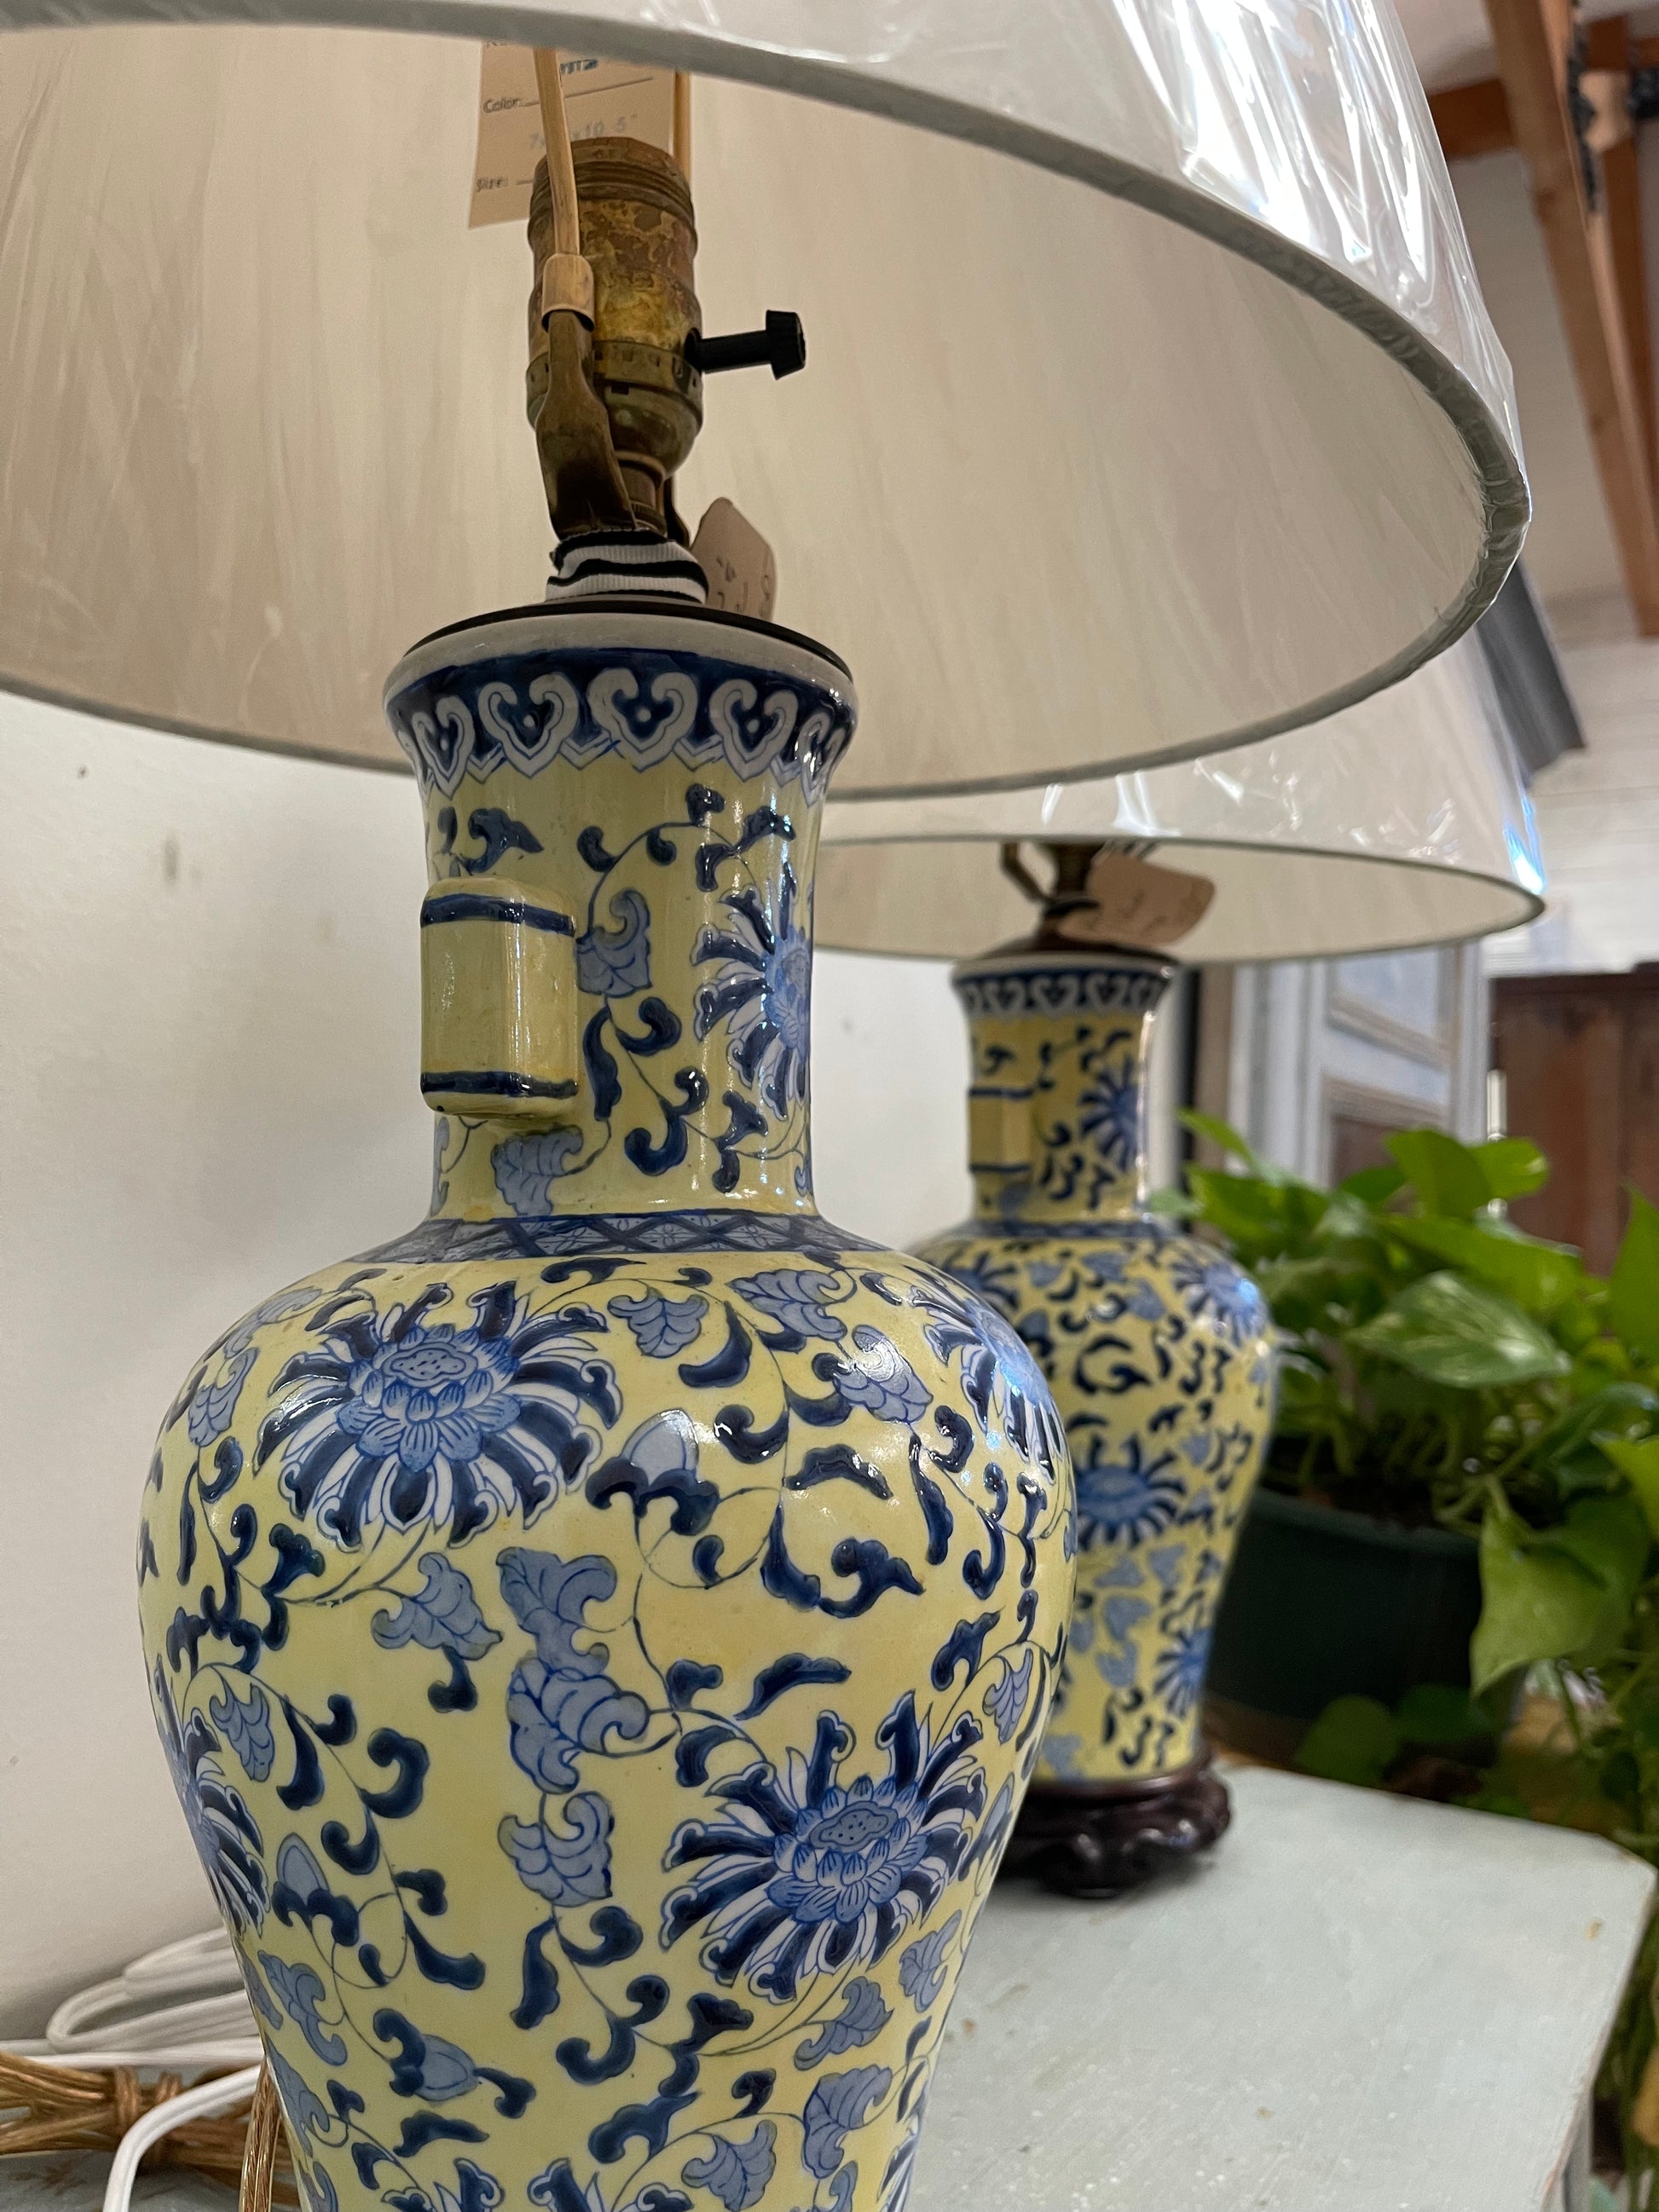 Blue and Yellow Chnoiserie Lamps with New Shades - The White Barn Antiques